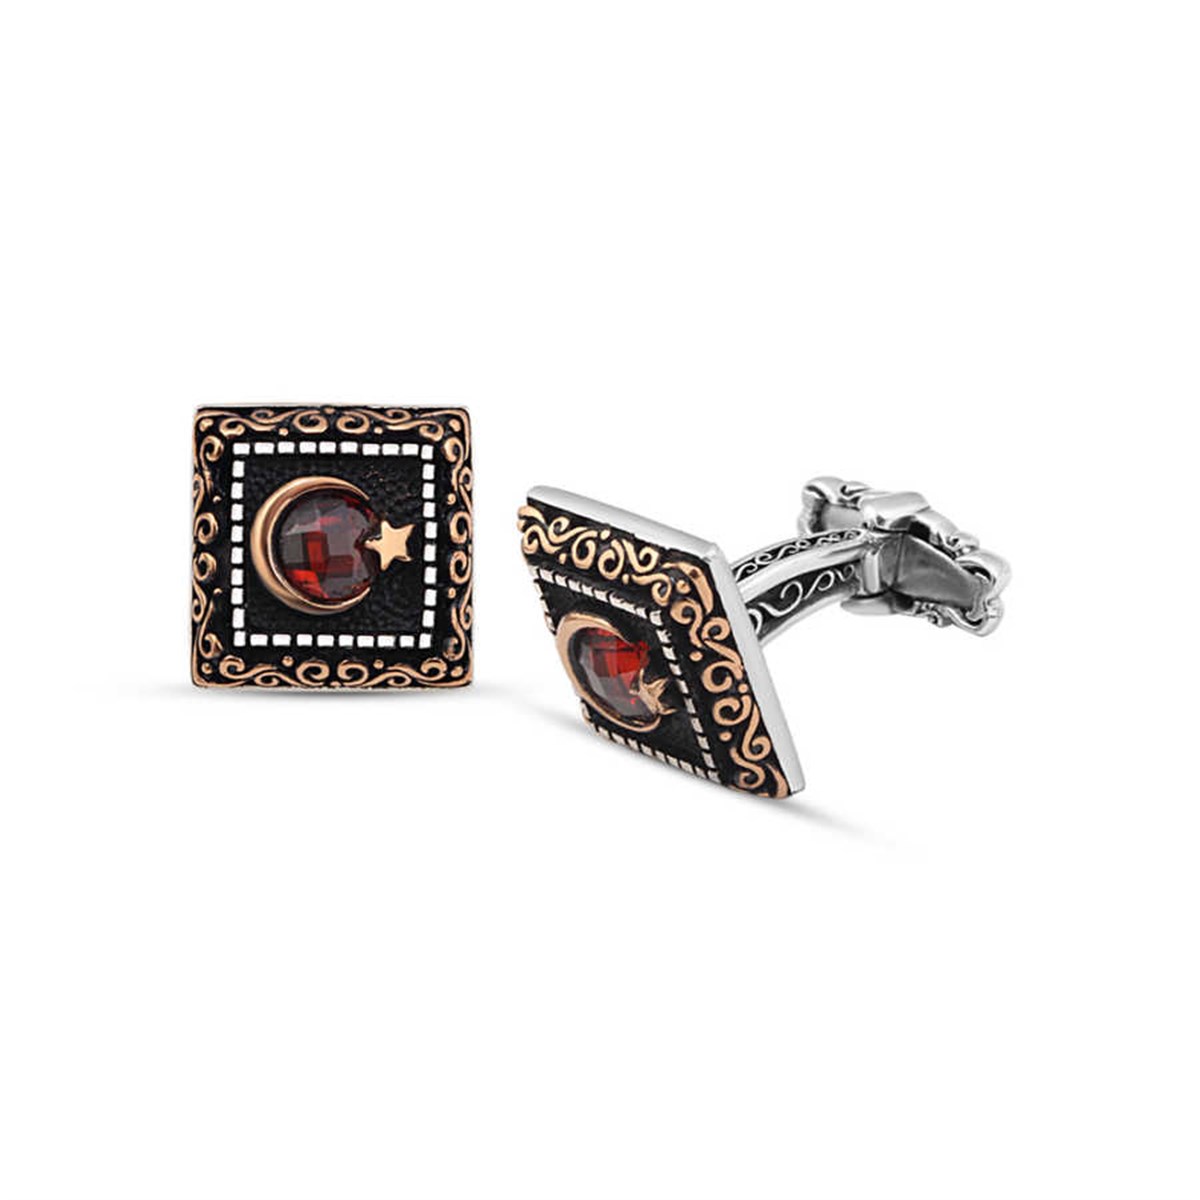 Silver Crescent and Star Cufflink with Zircon Stone